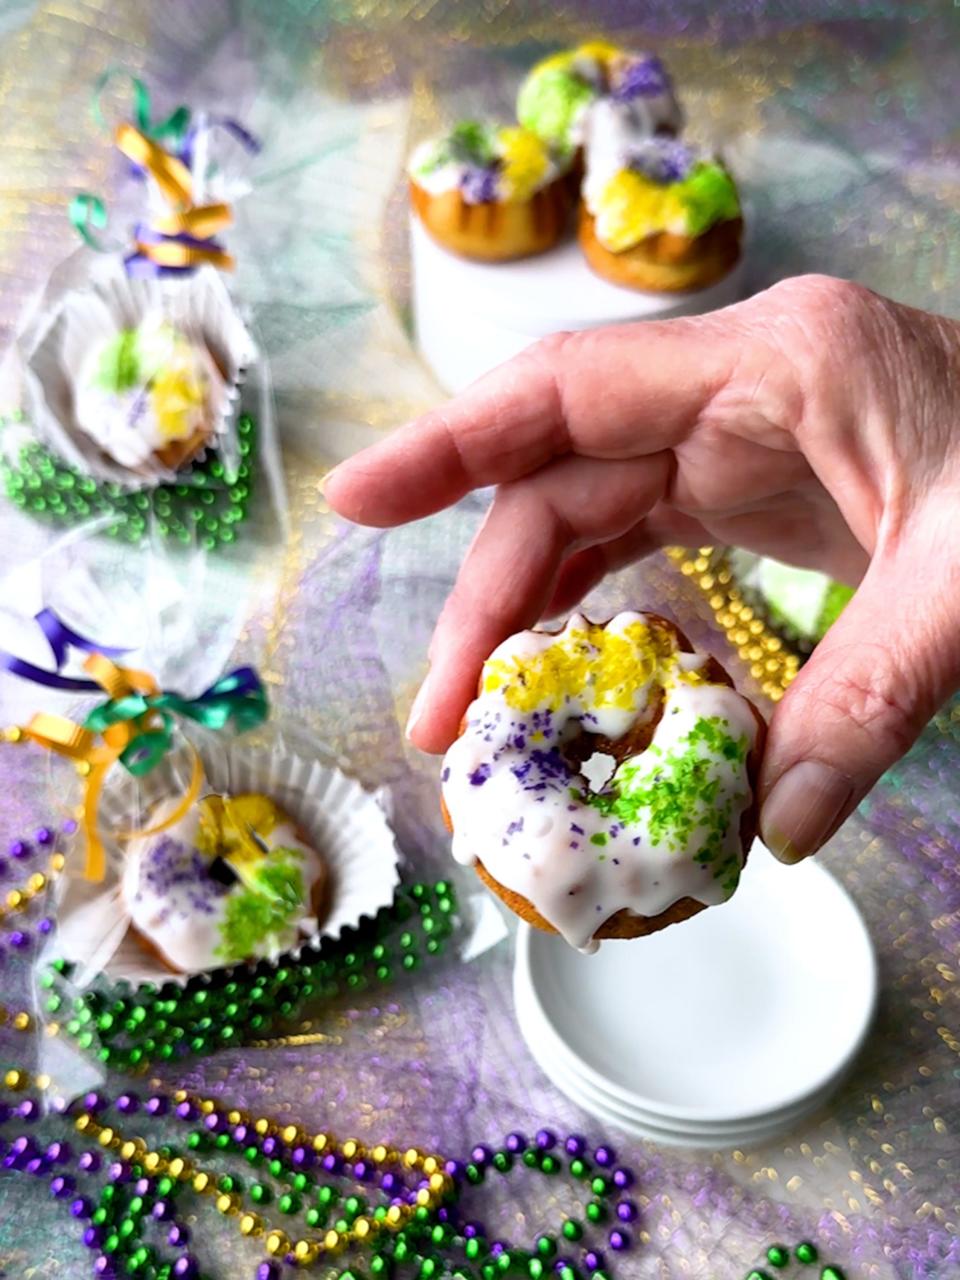 The dough for mini king cakes can be made in a bread machine.